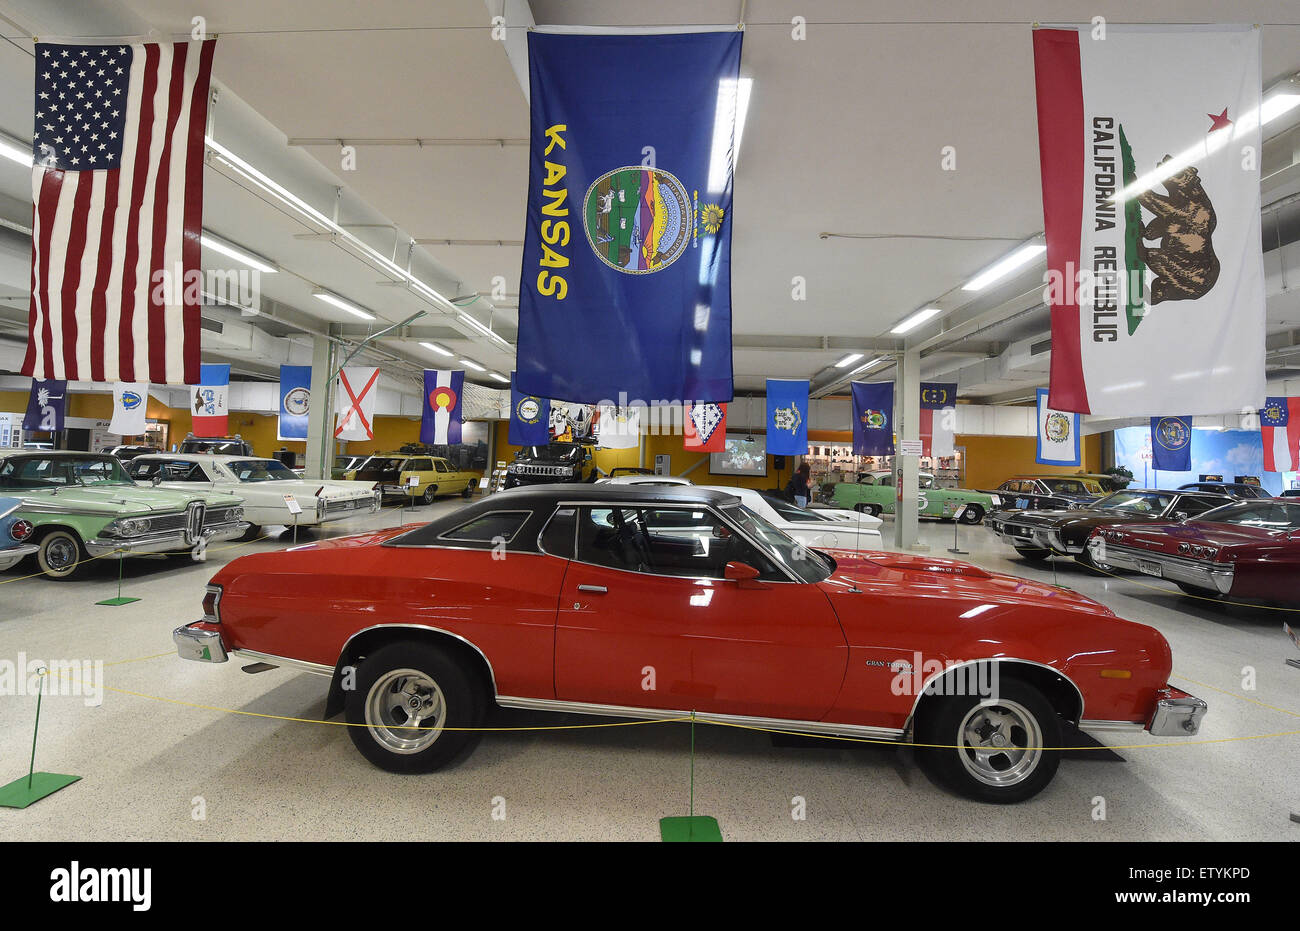 Ostrava, Czech Republic. 16th June, 2015. Exhibition called American Classic Cars from 1930 to 1980 launched today in Ostrava, Czech Republic, June 16, 2015. In the picture is seen Ford Grand Torino car from year 1974. © Jaroslav Ozana/CTK Photo/Alamy Live News Stock Photo